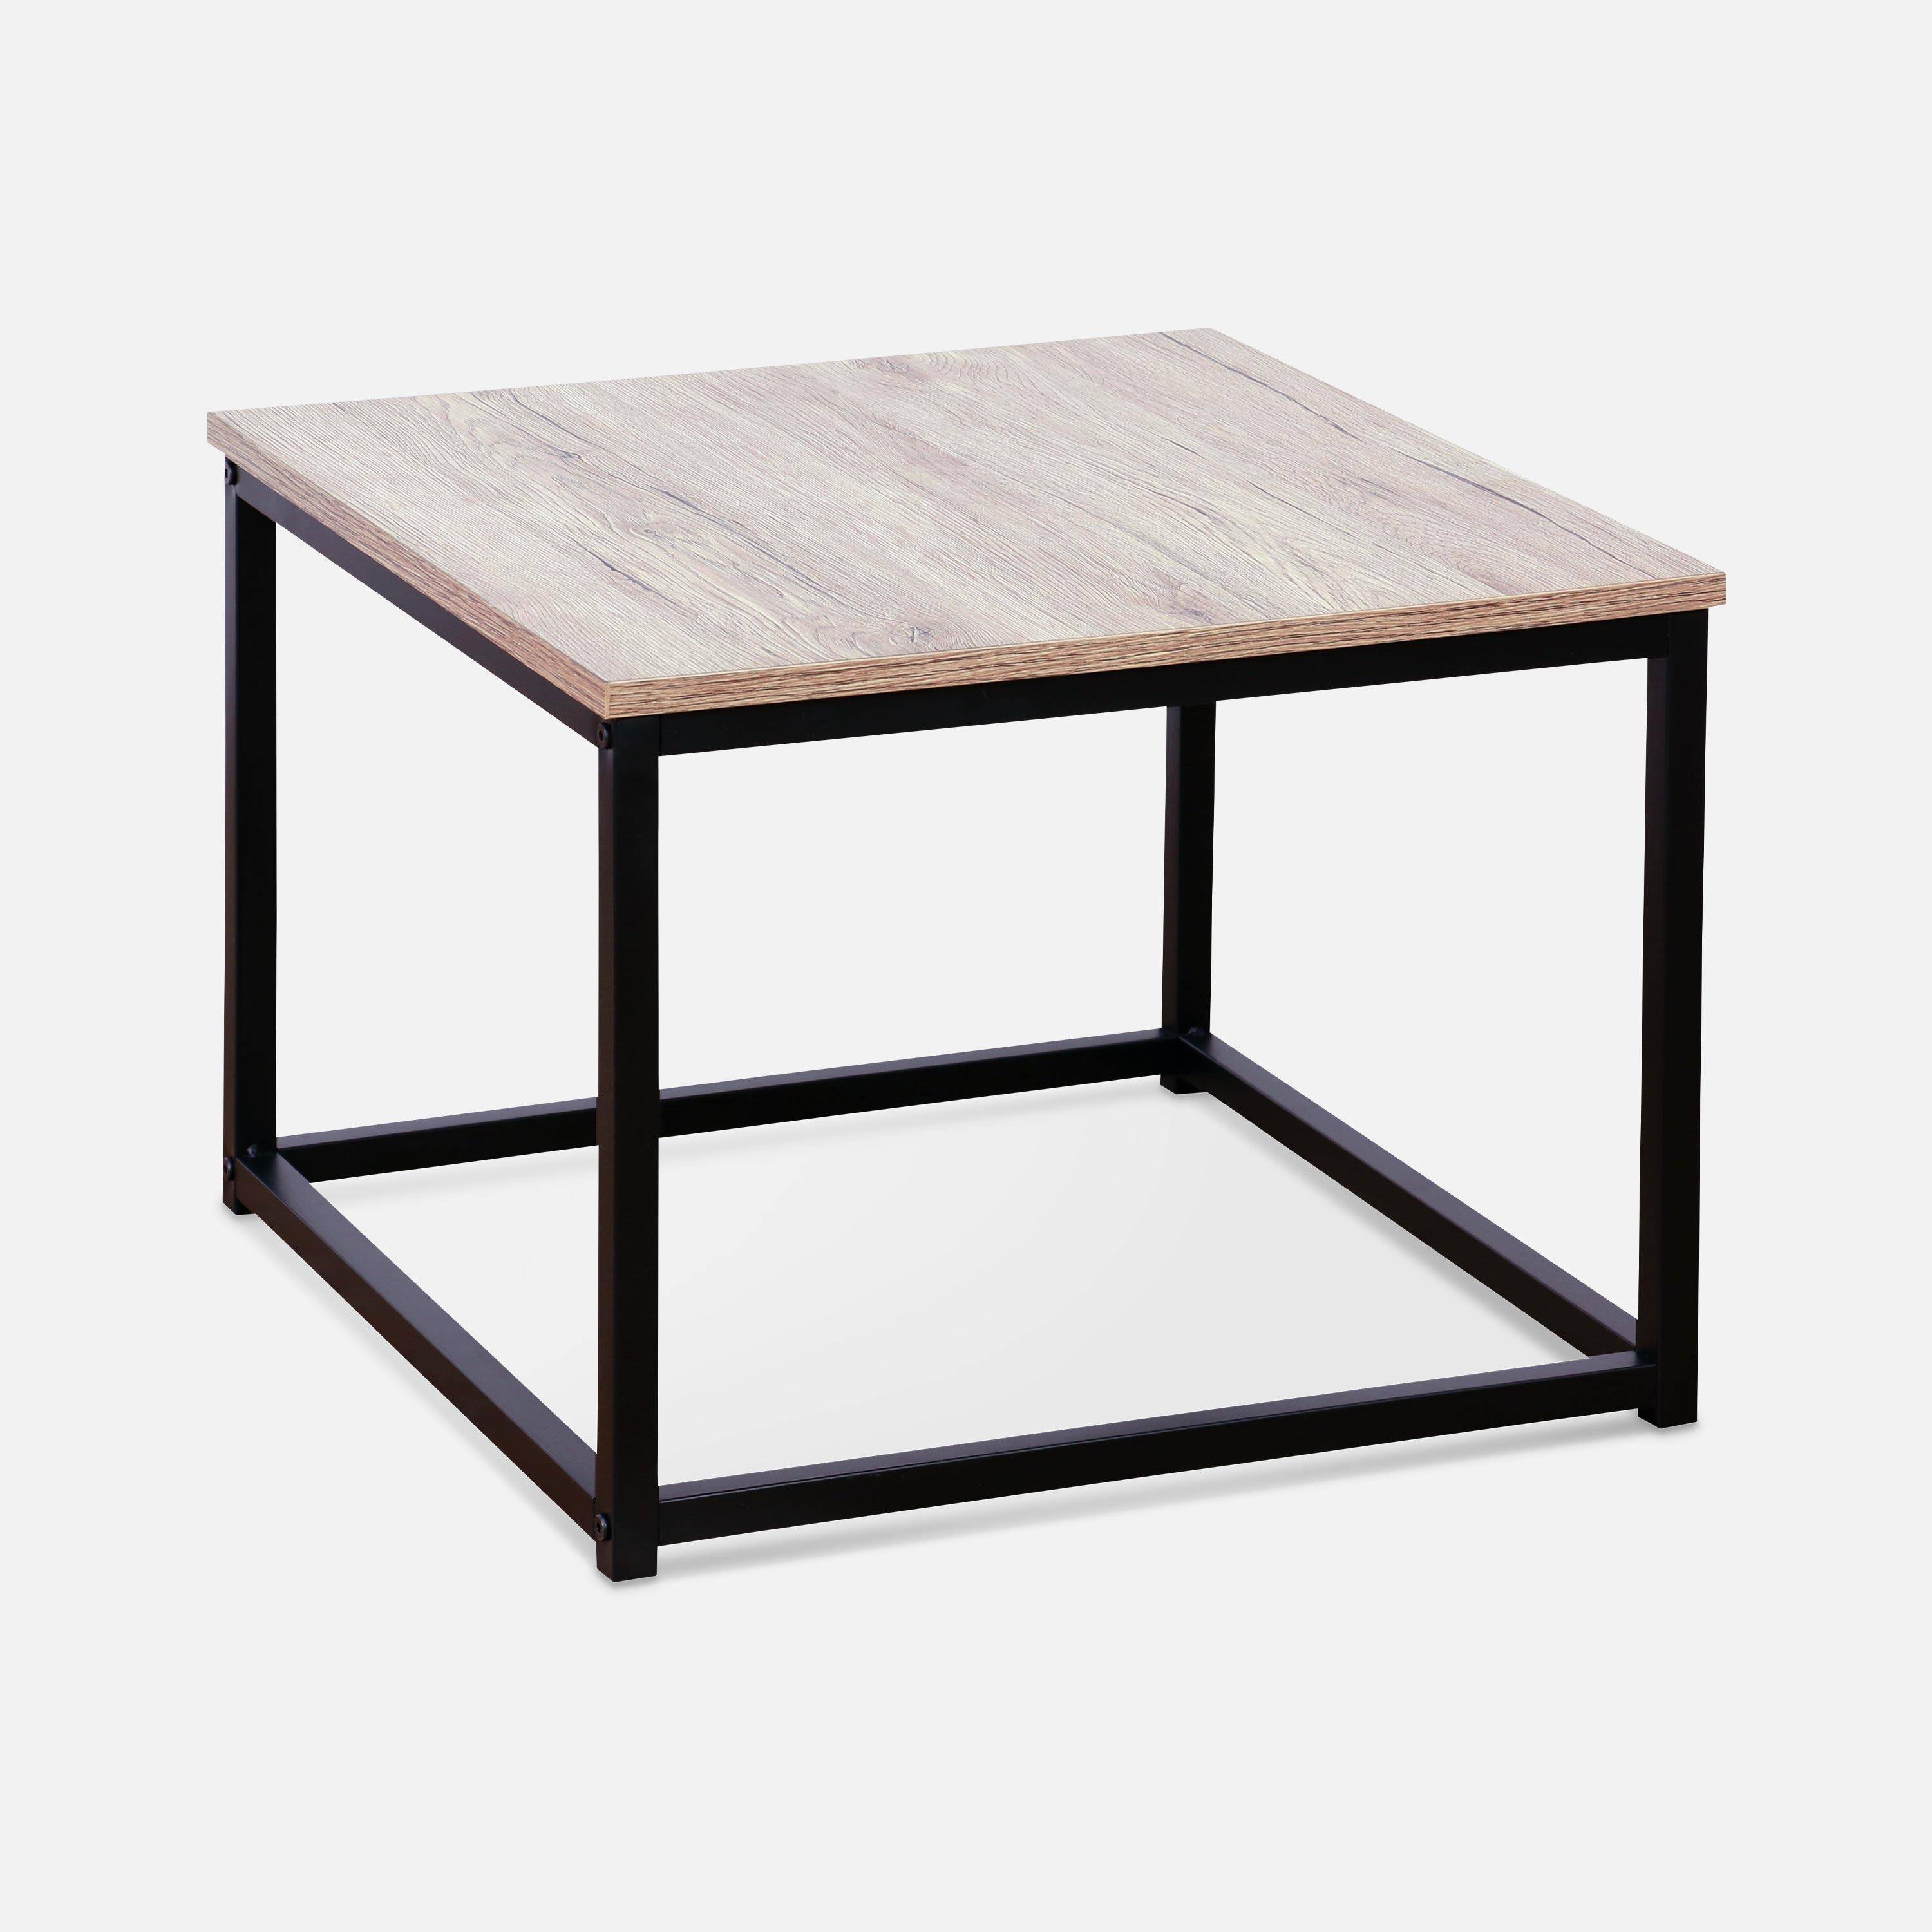 Set of 3 metal and wood-effect nesting tables, large table 100x60x45cm, 2x small tables 50x50x38cm - Loft - Black Photo7